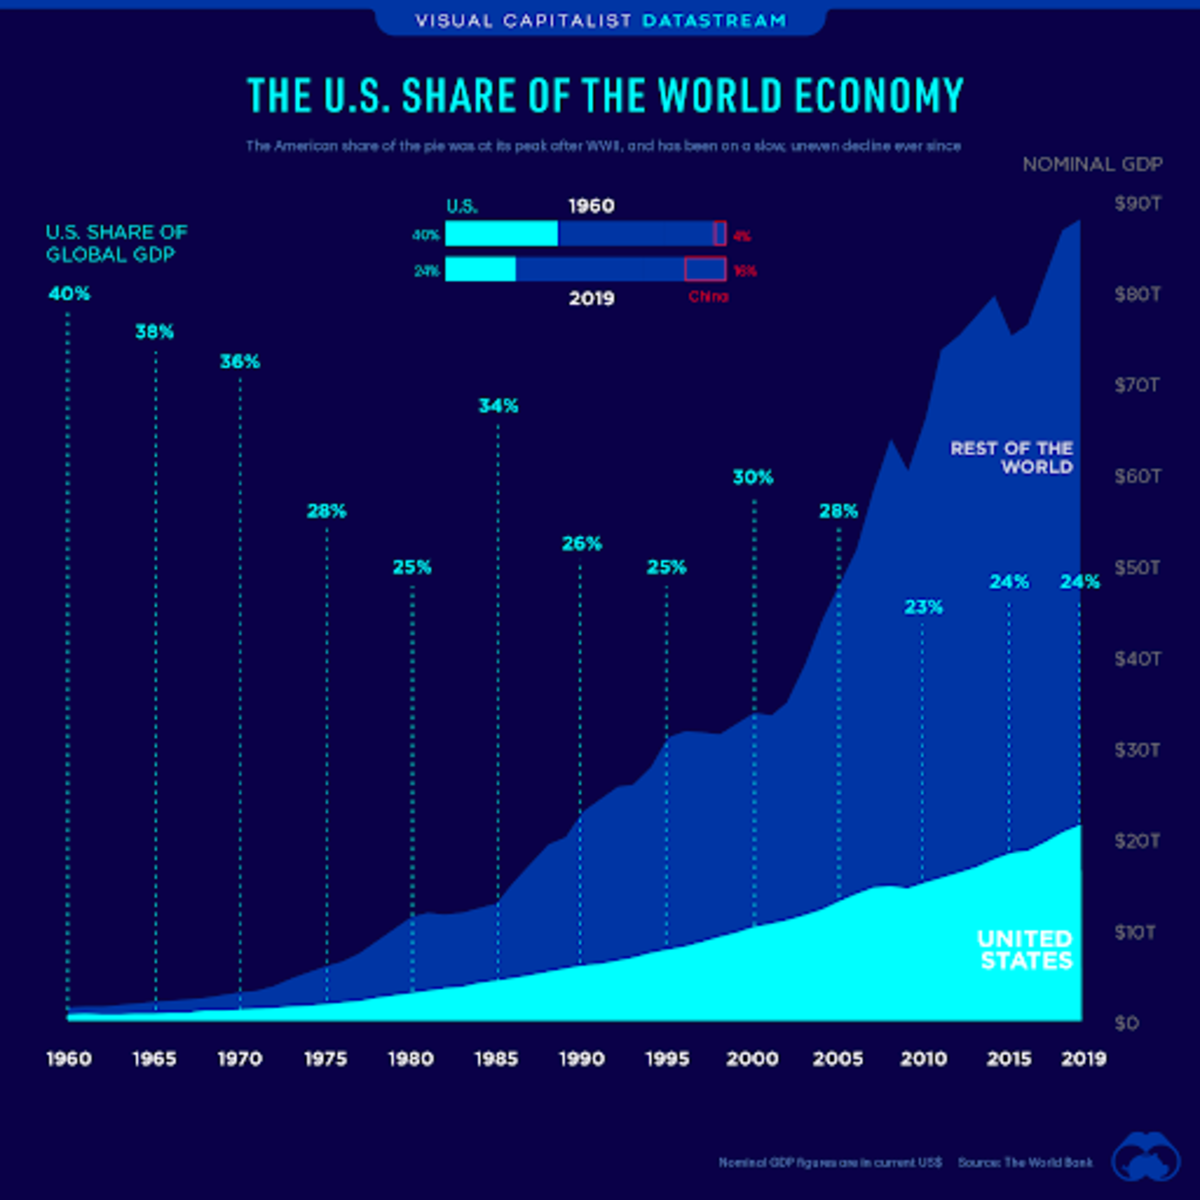 Source: Visual Capitalist, “The U.S. Share of the Global Economy Over Time.” The chart shows the U.S.’s share of the global economy declining and the rest of the world disproportionately benefiting from the dollar’s role.